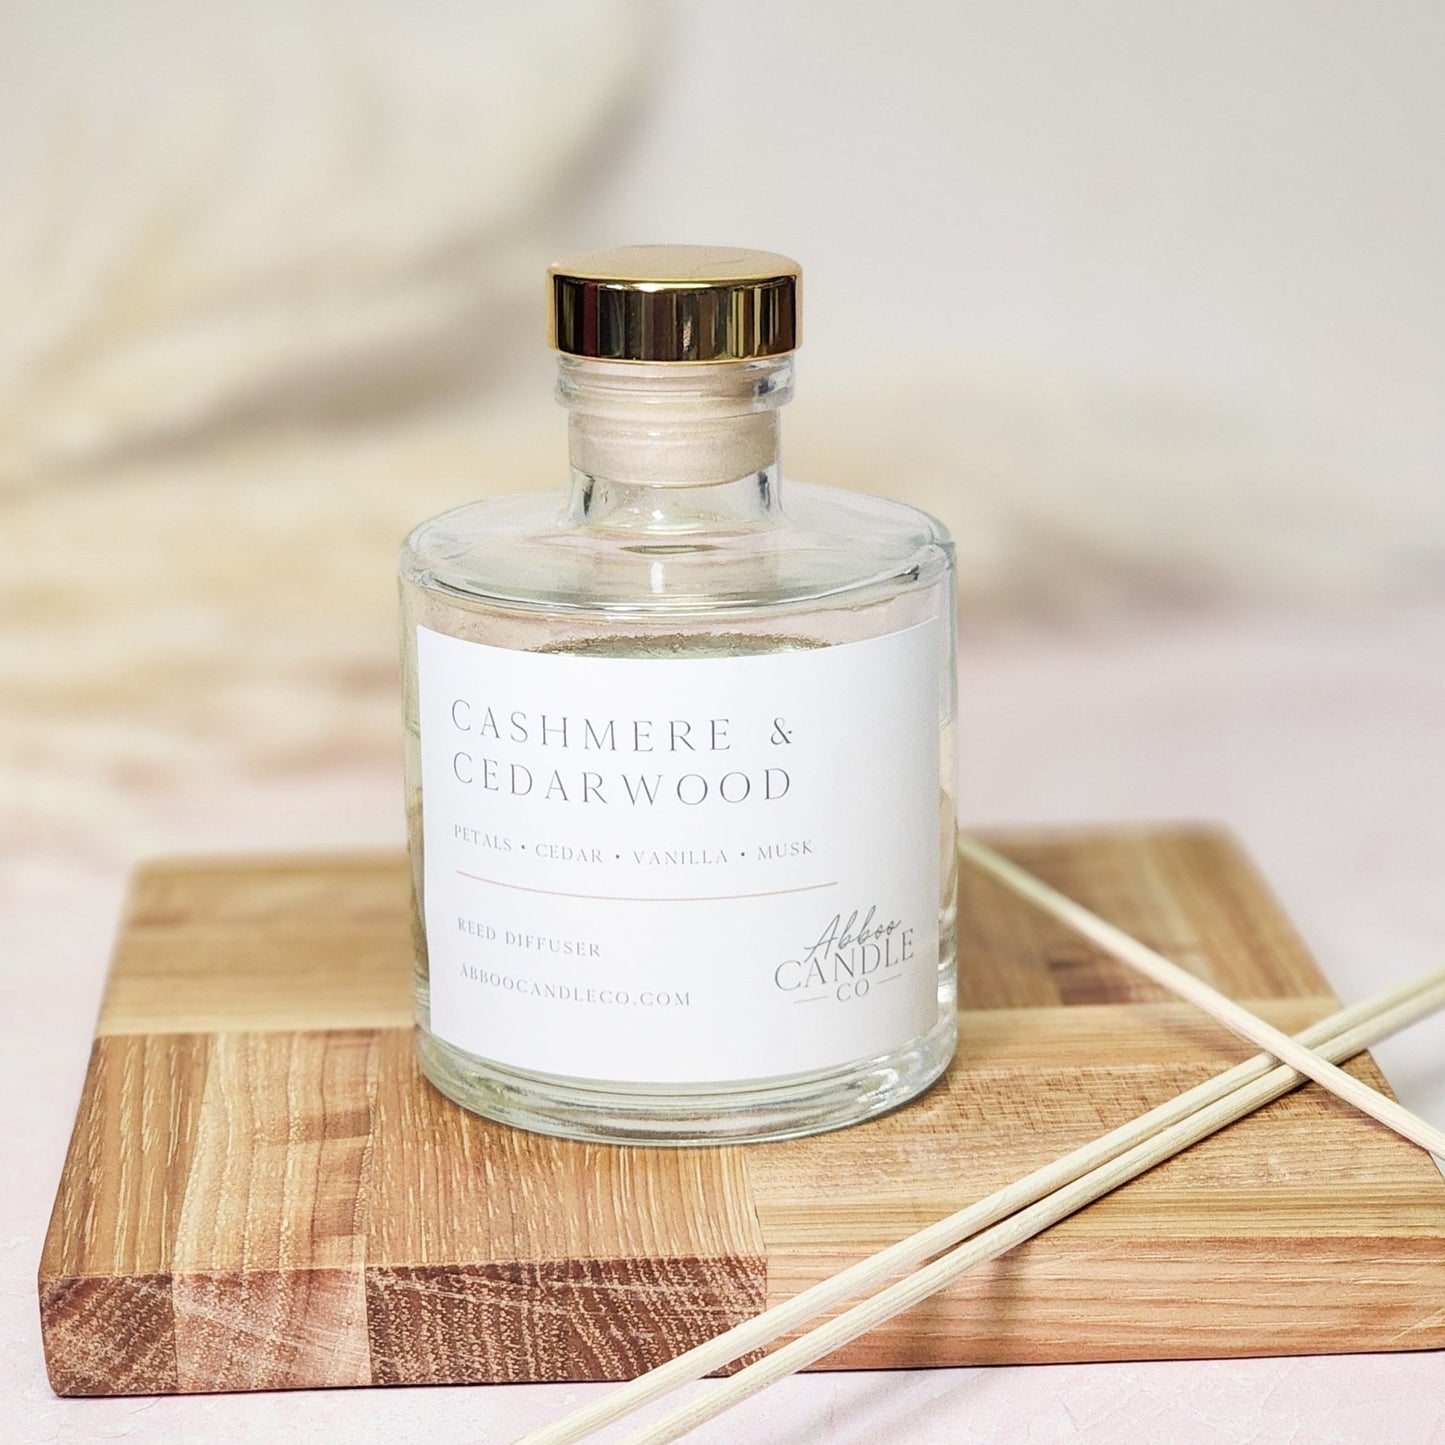 Cashmere and Cedarwood Reed Diffuser - Abboo Candle Co